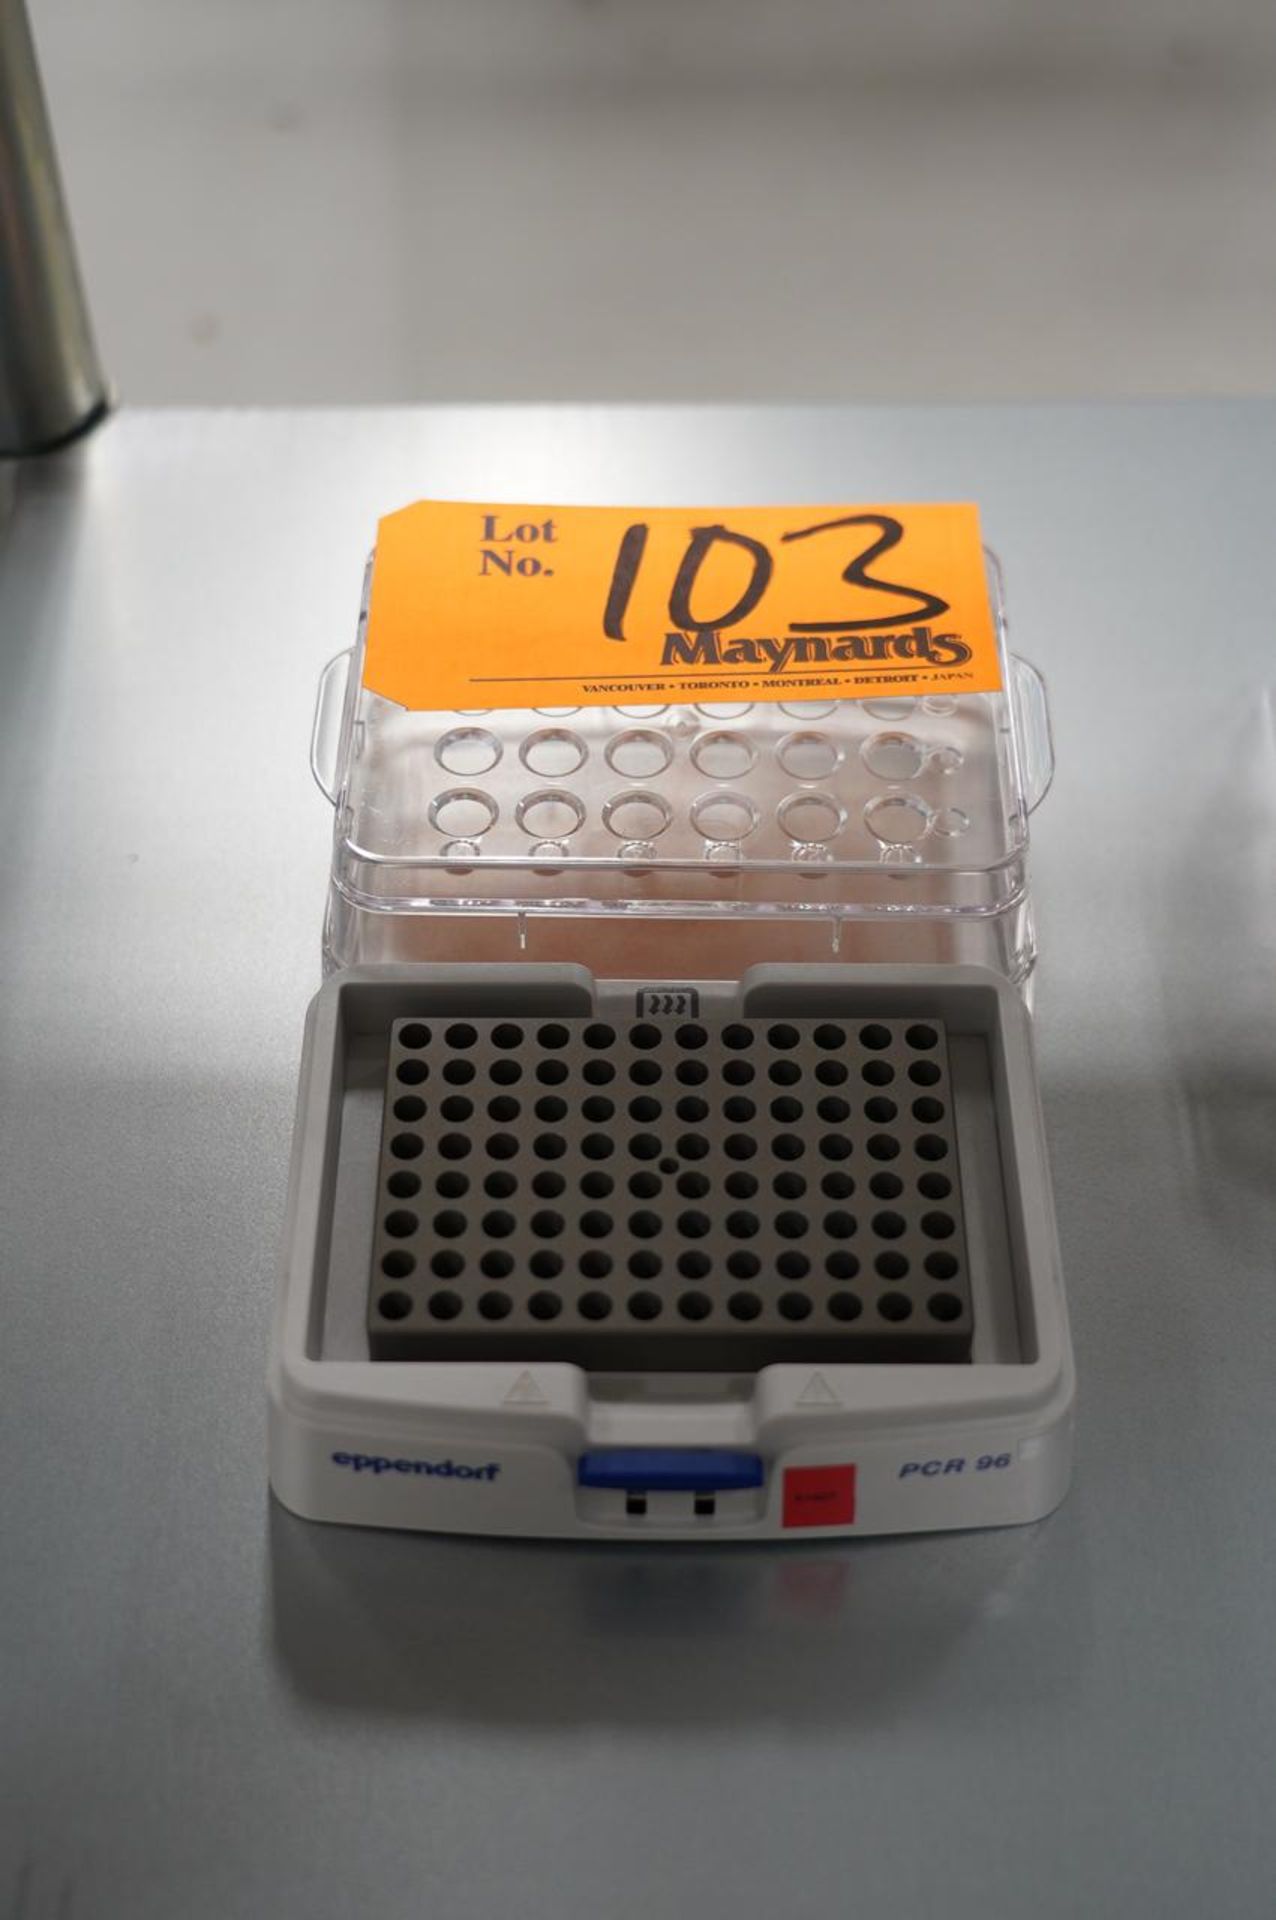 Eppendorf 5306HQ405354 Thermoblock for PCR plates 96